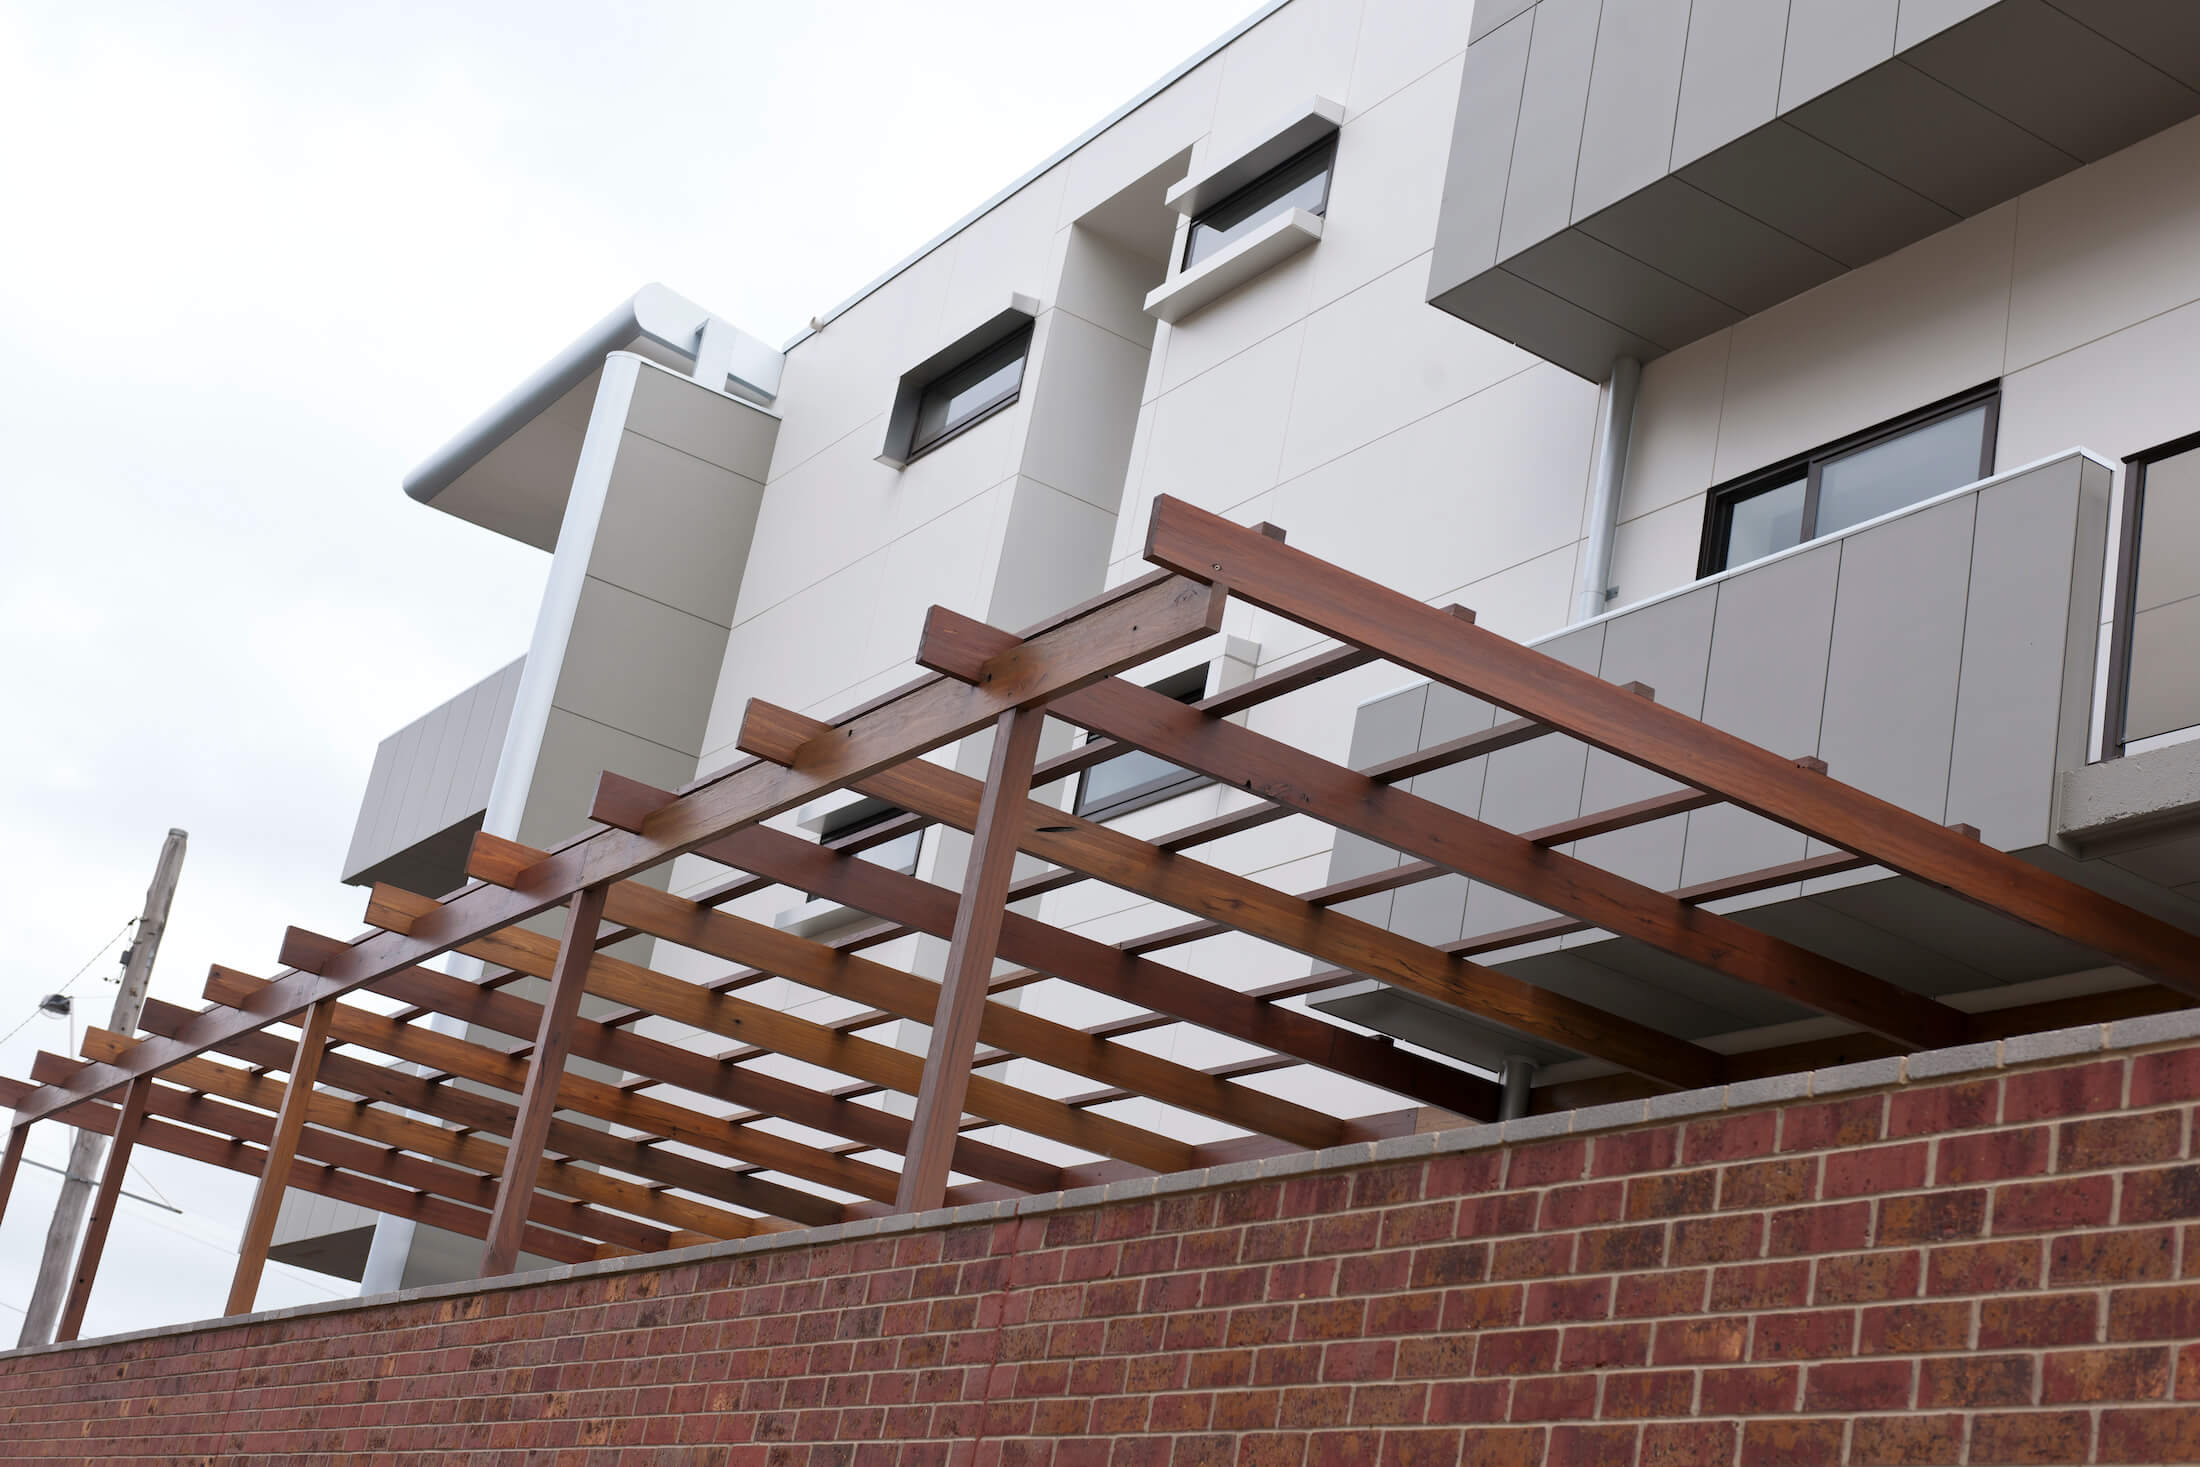 Timber structure over outdoor area, contemporary clad apartment building above